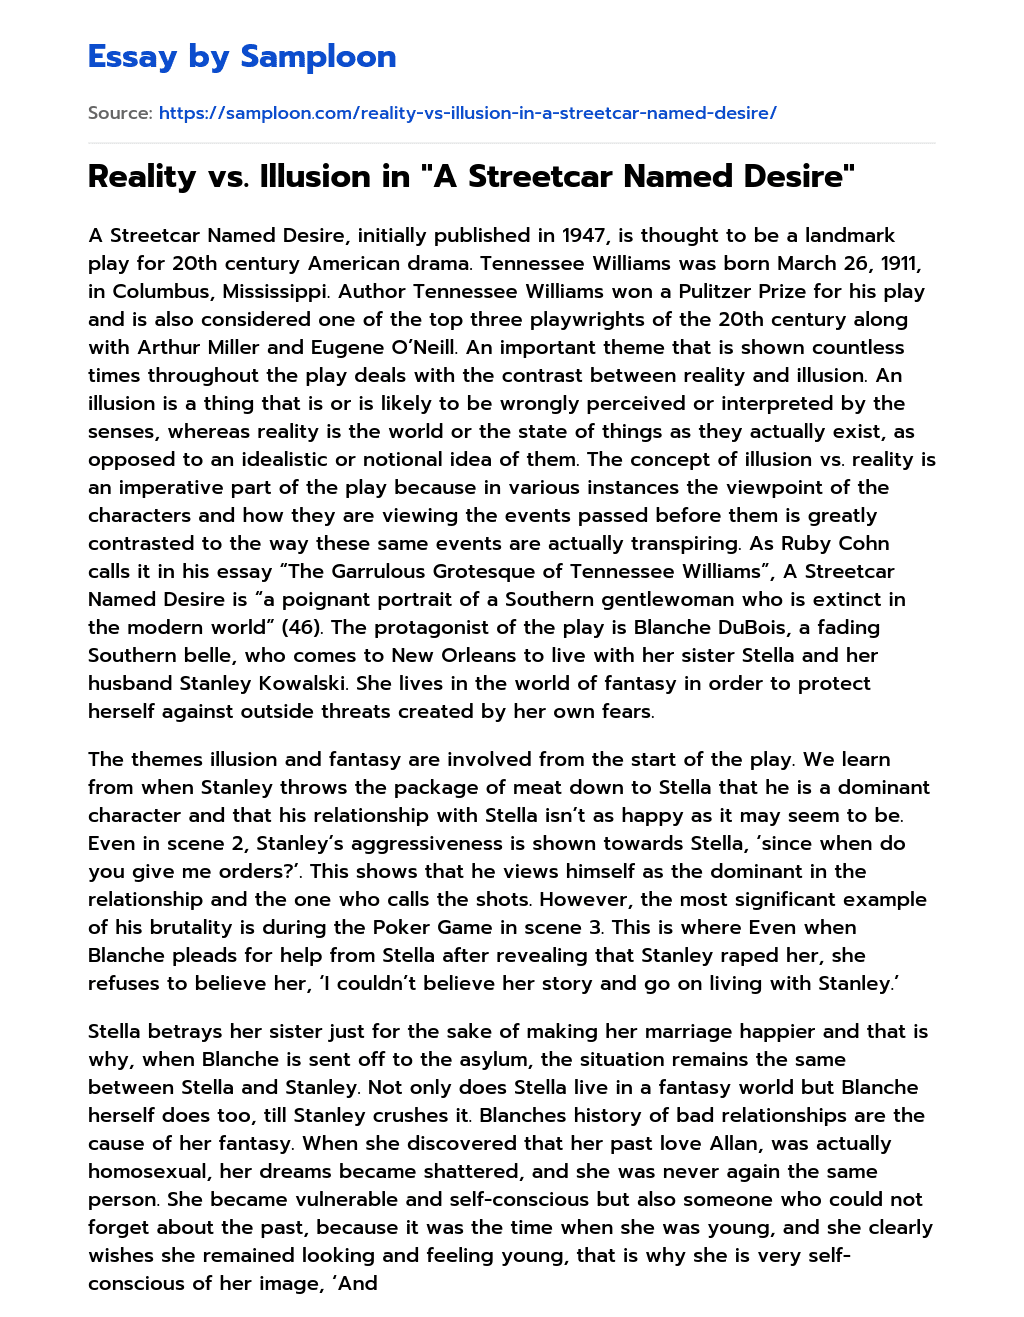 illusion and reality in a streetcar named desire essay